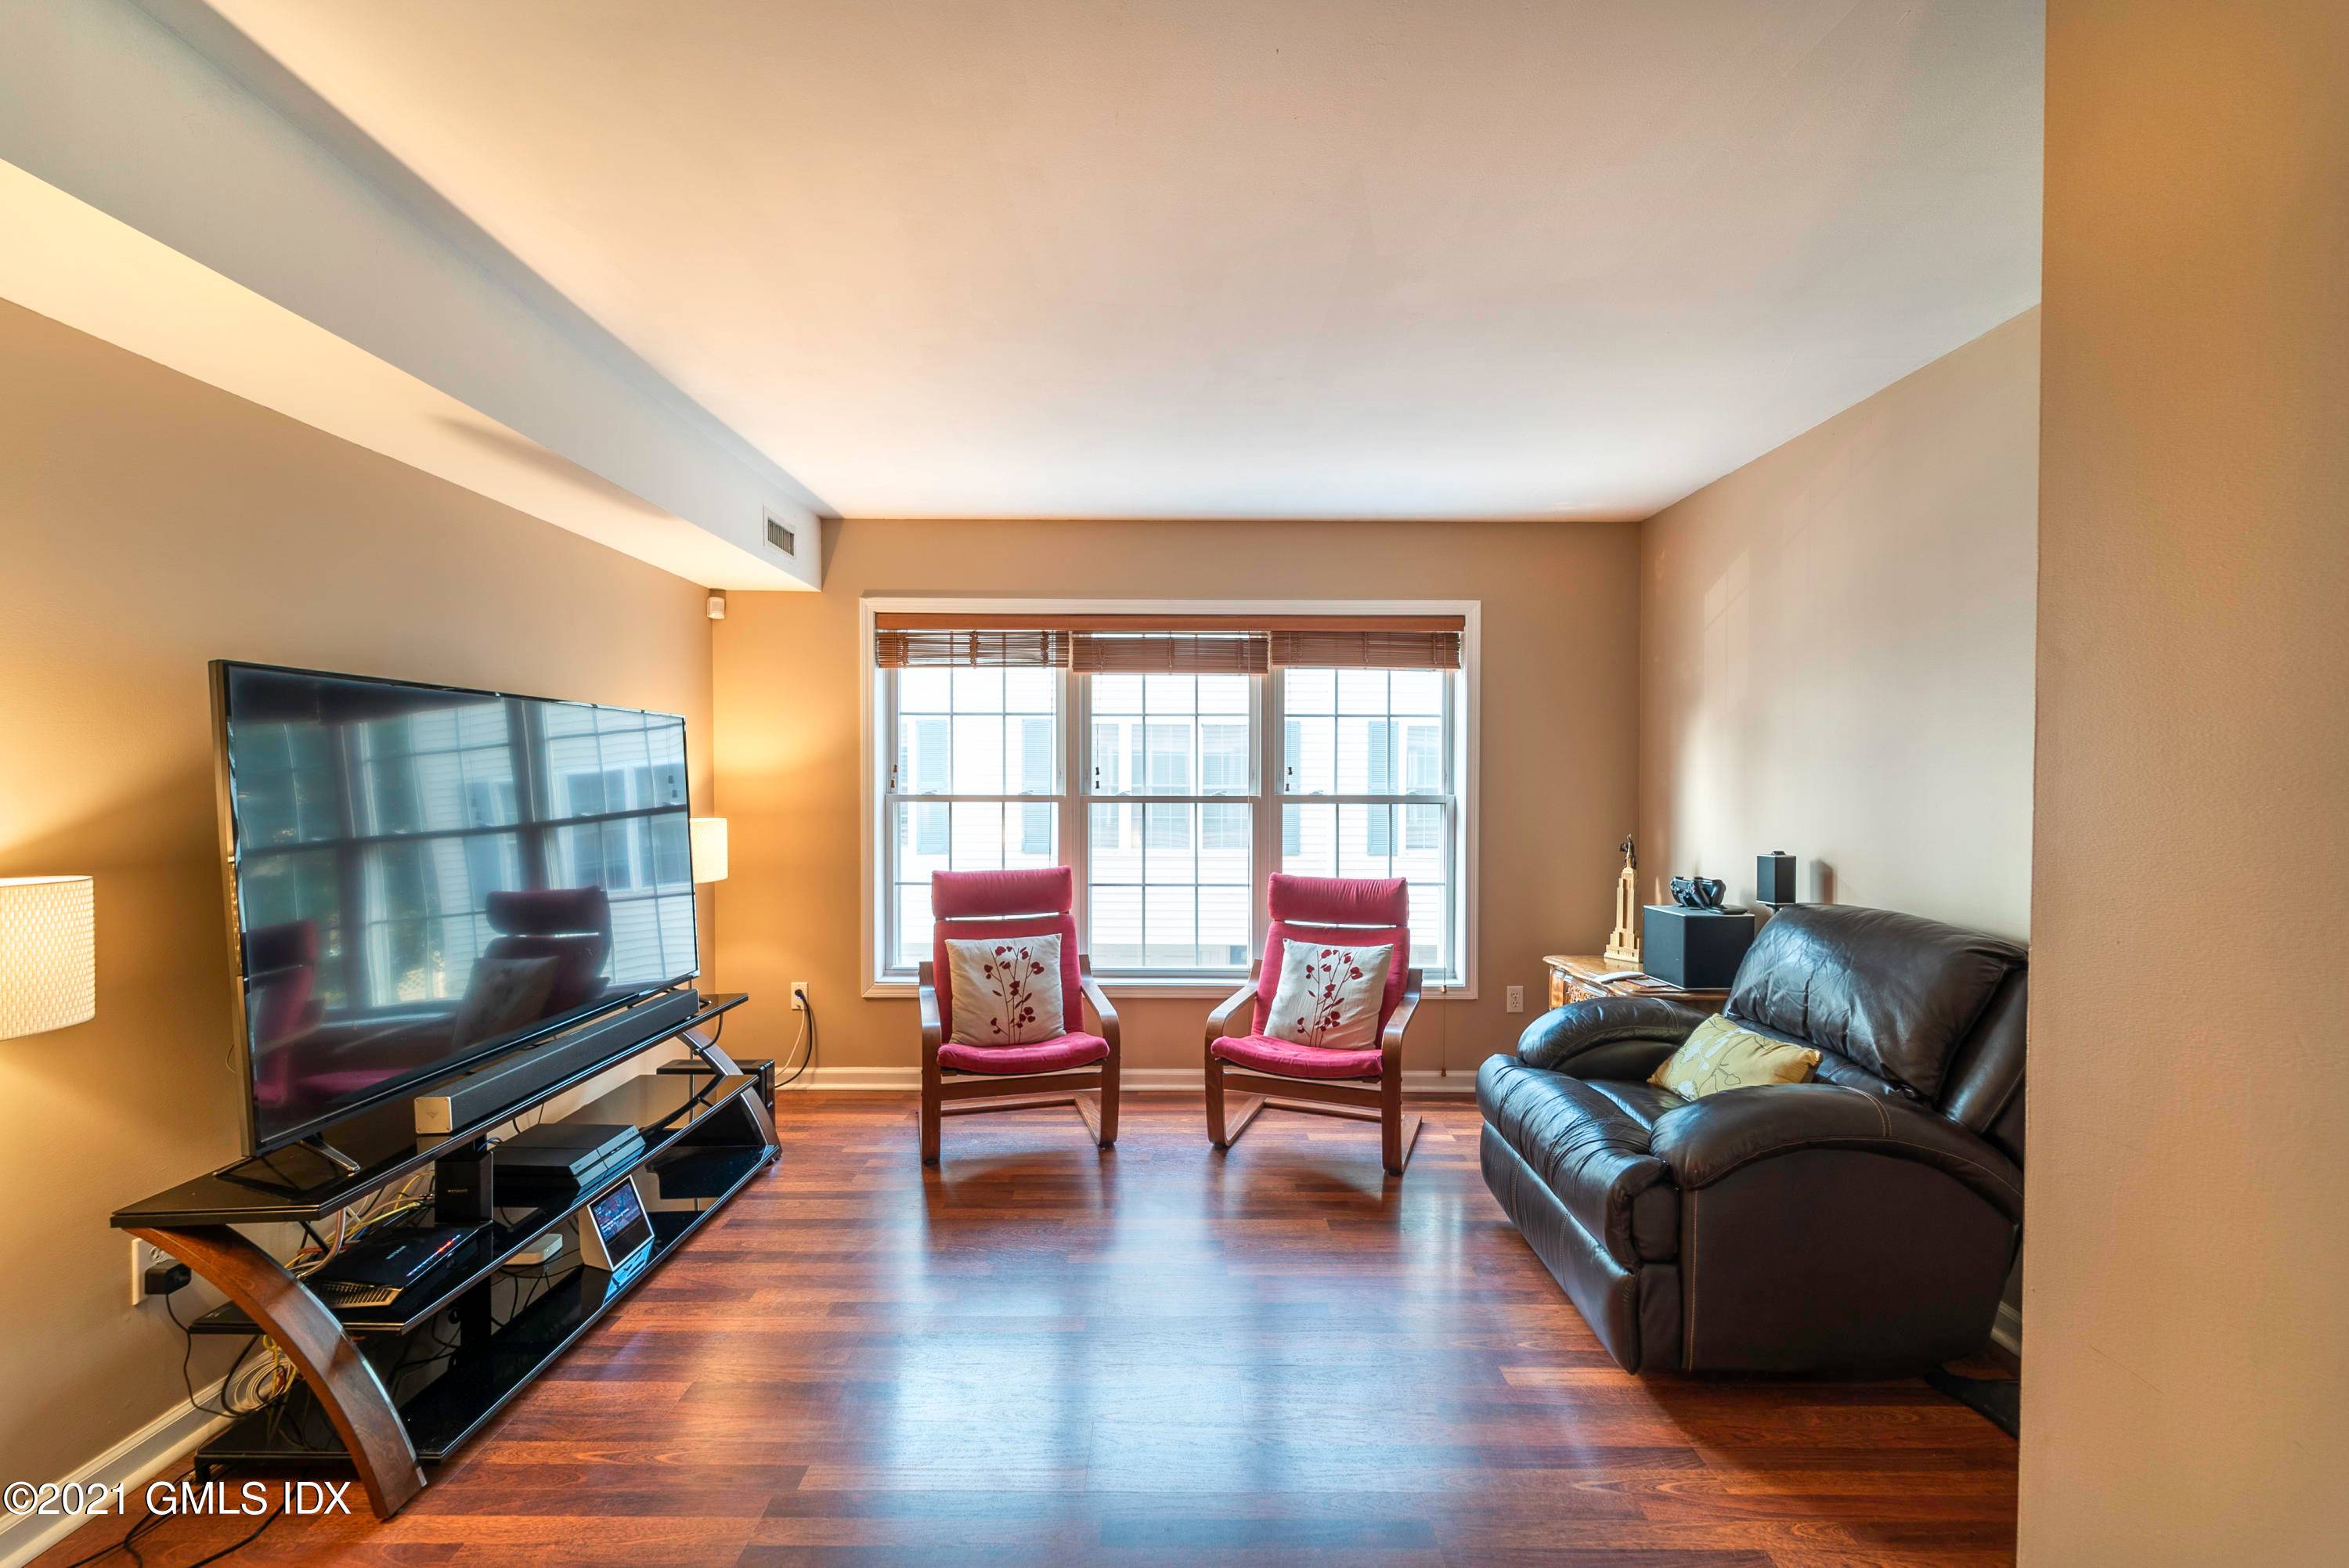 Not to be missed ! Glenway Court townhouse located near the heart of downtown Stamford.